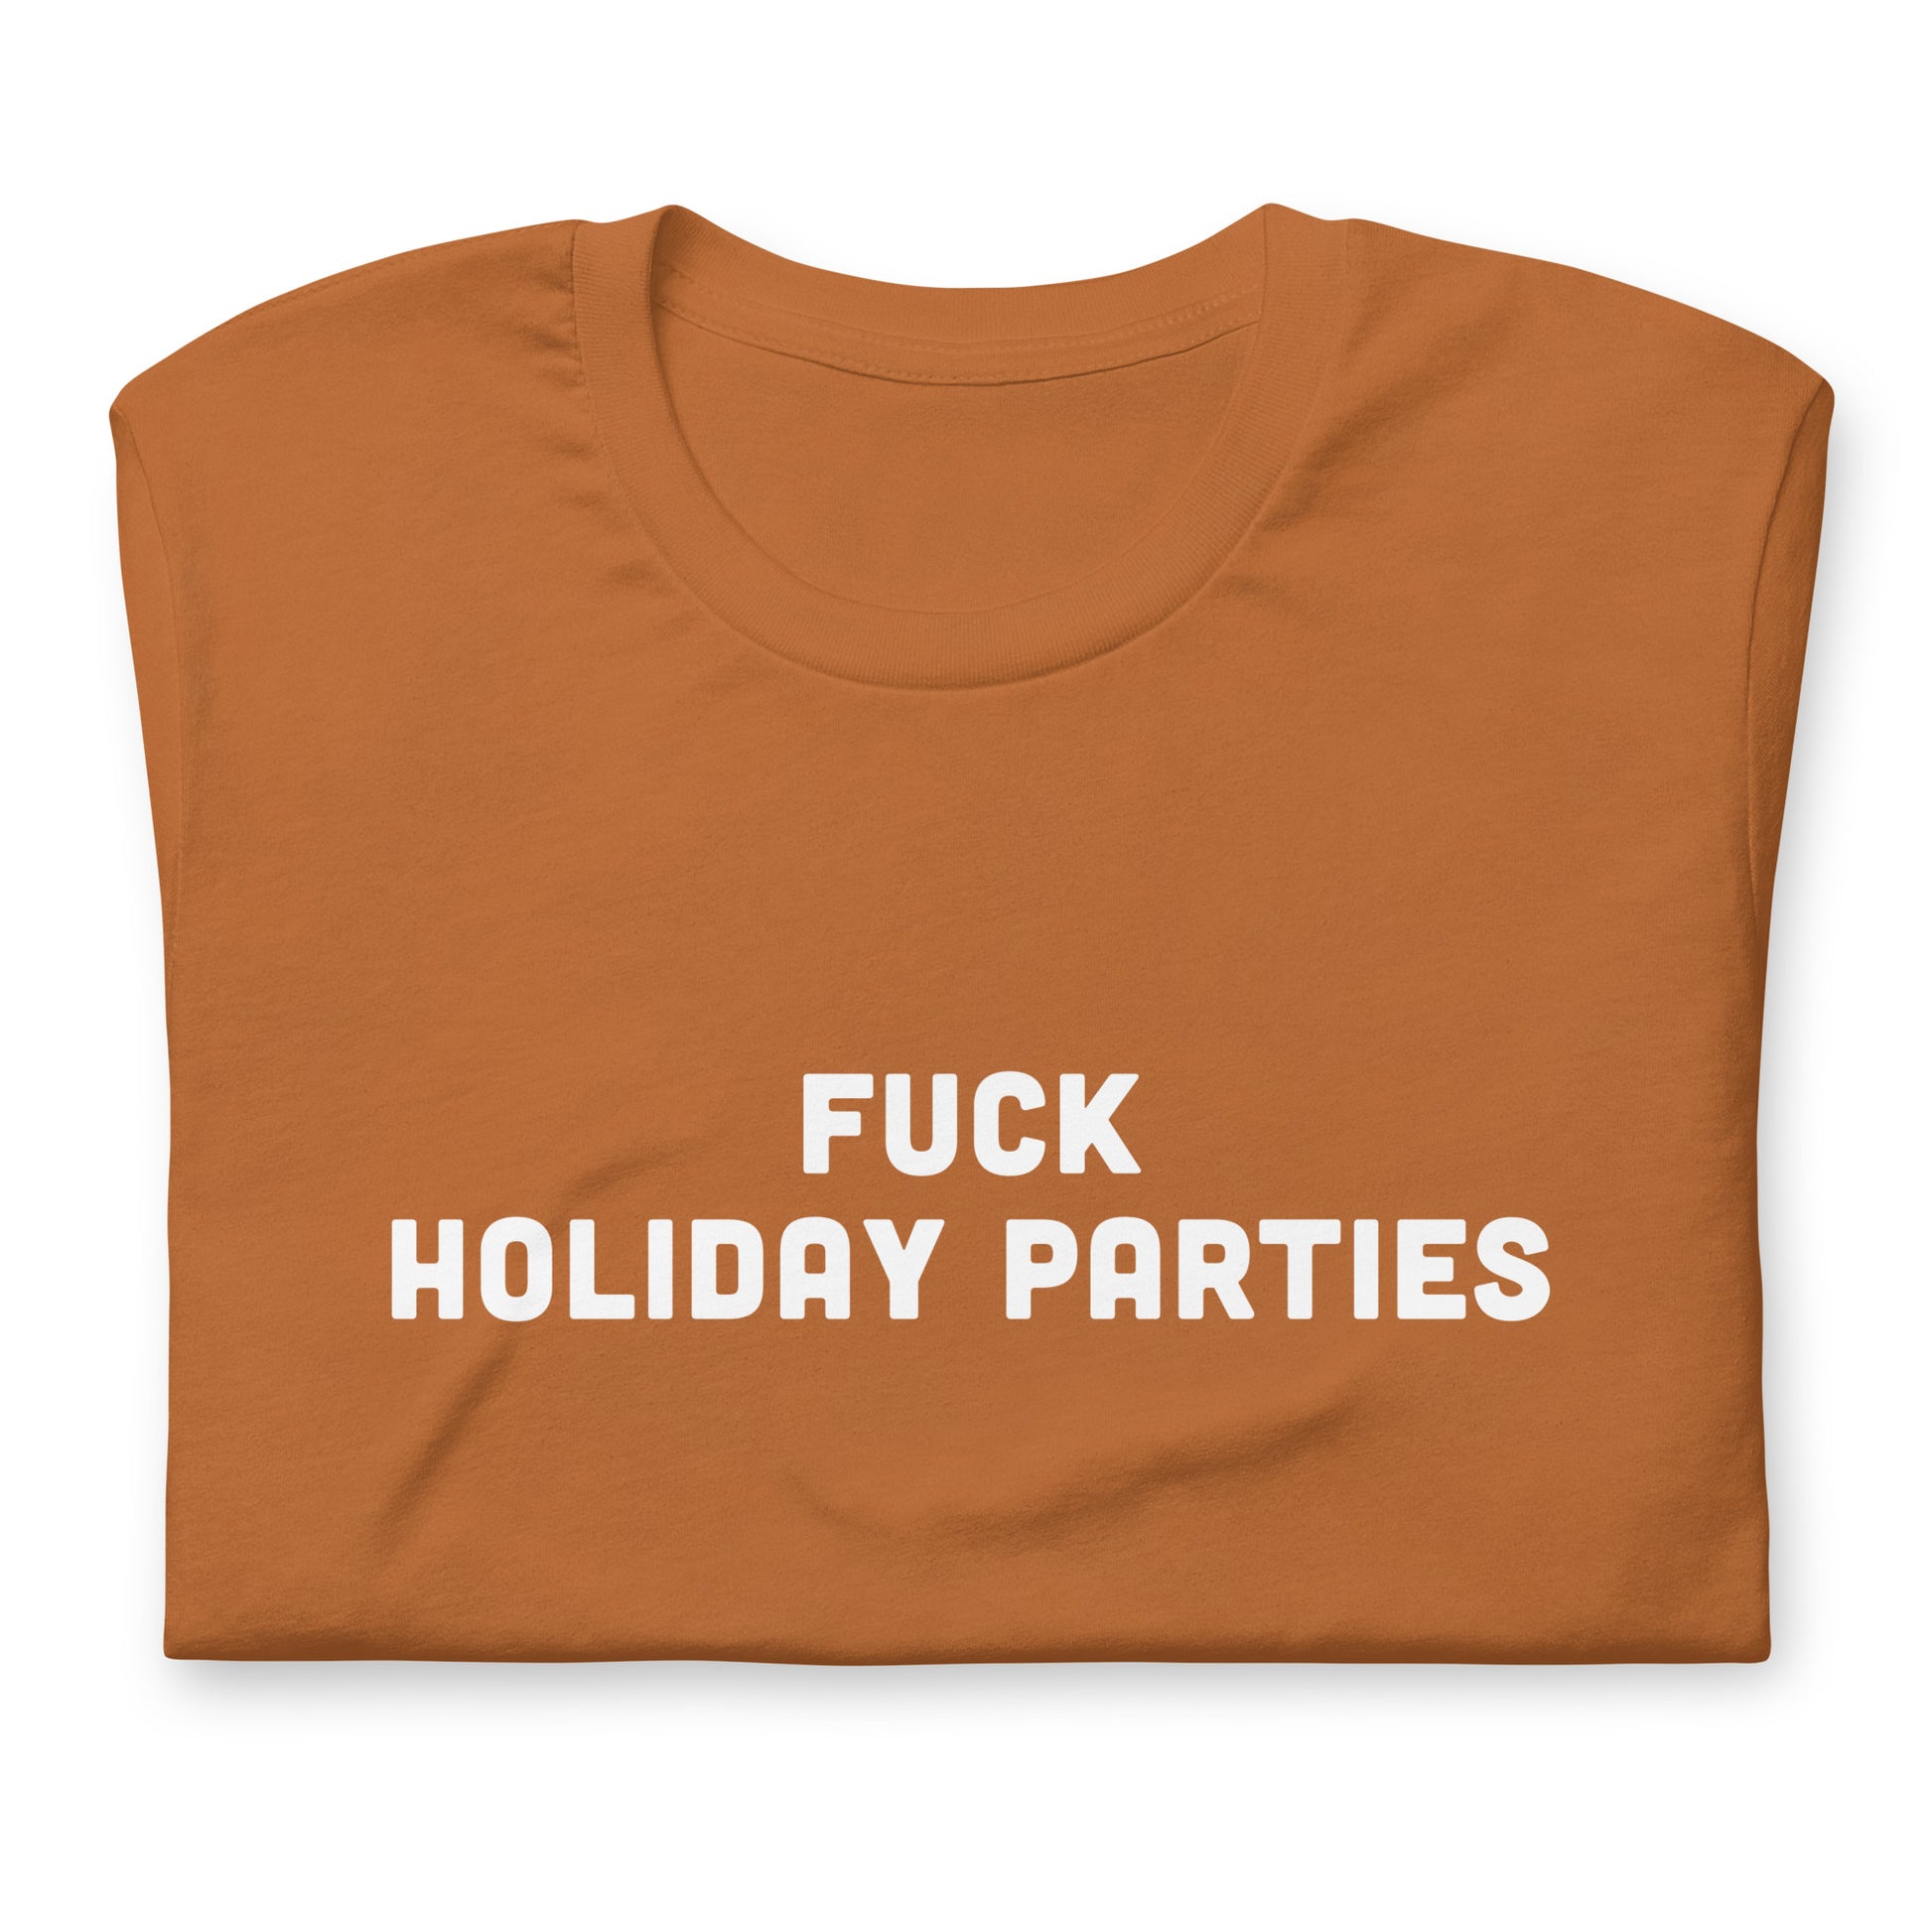 Fuck Holiday Parties T-Shirt Size XL Color Navy